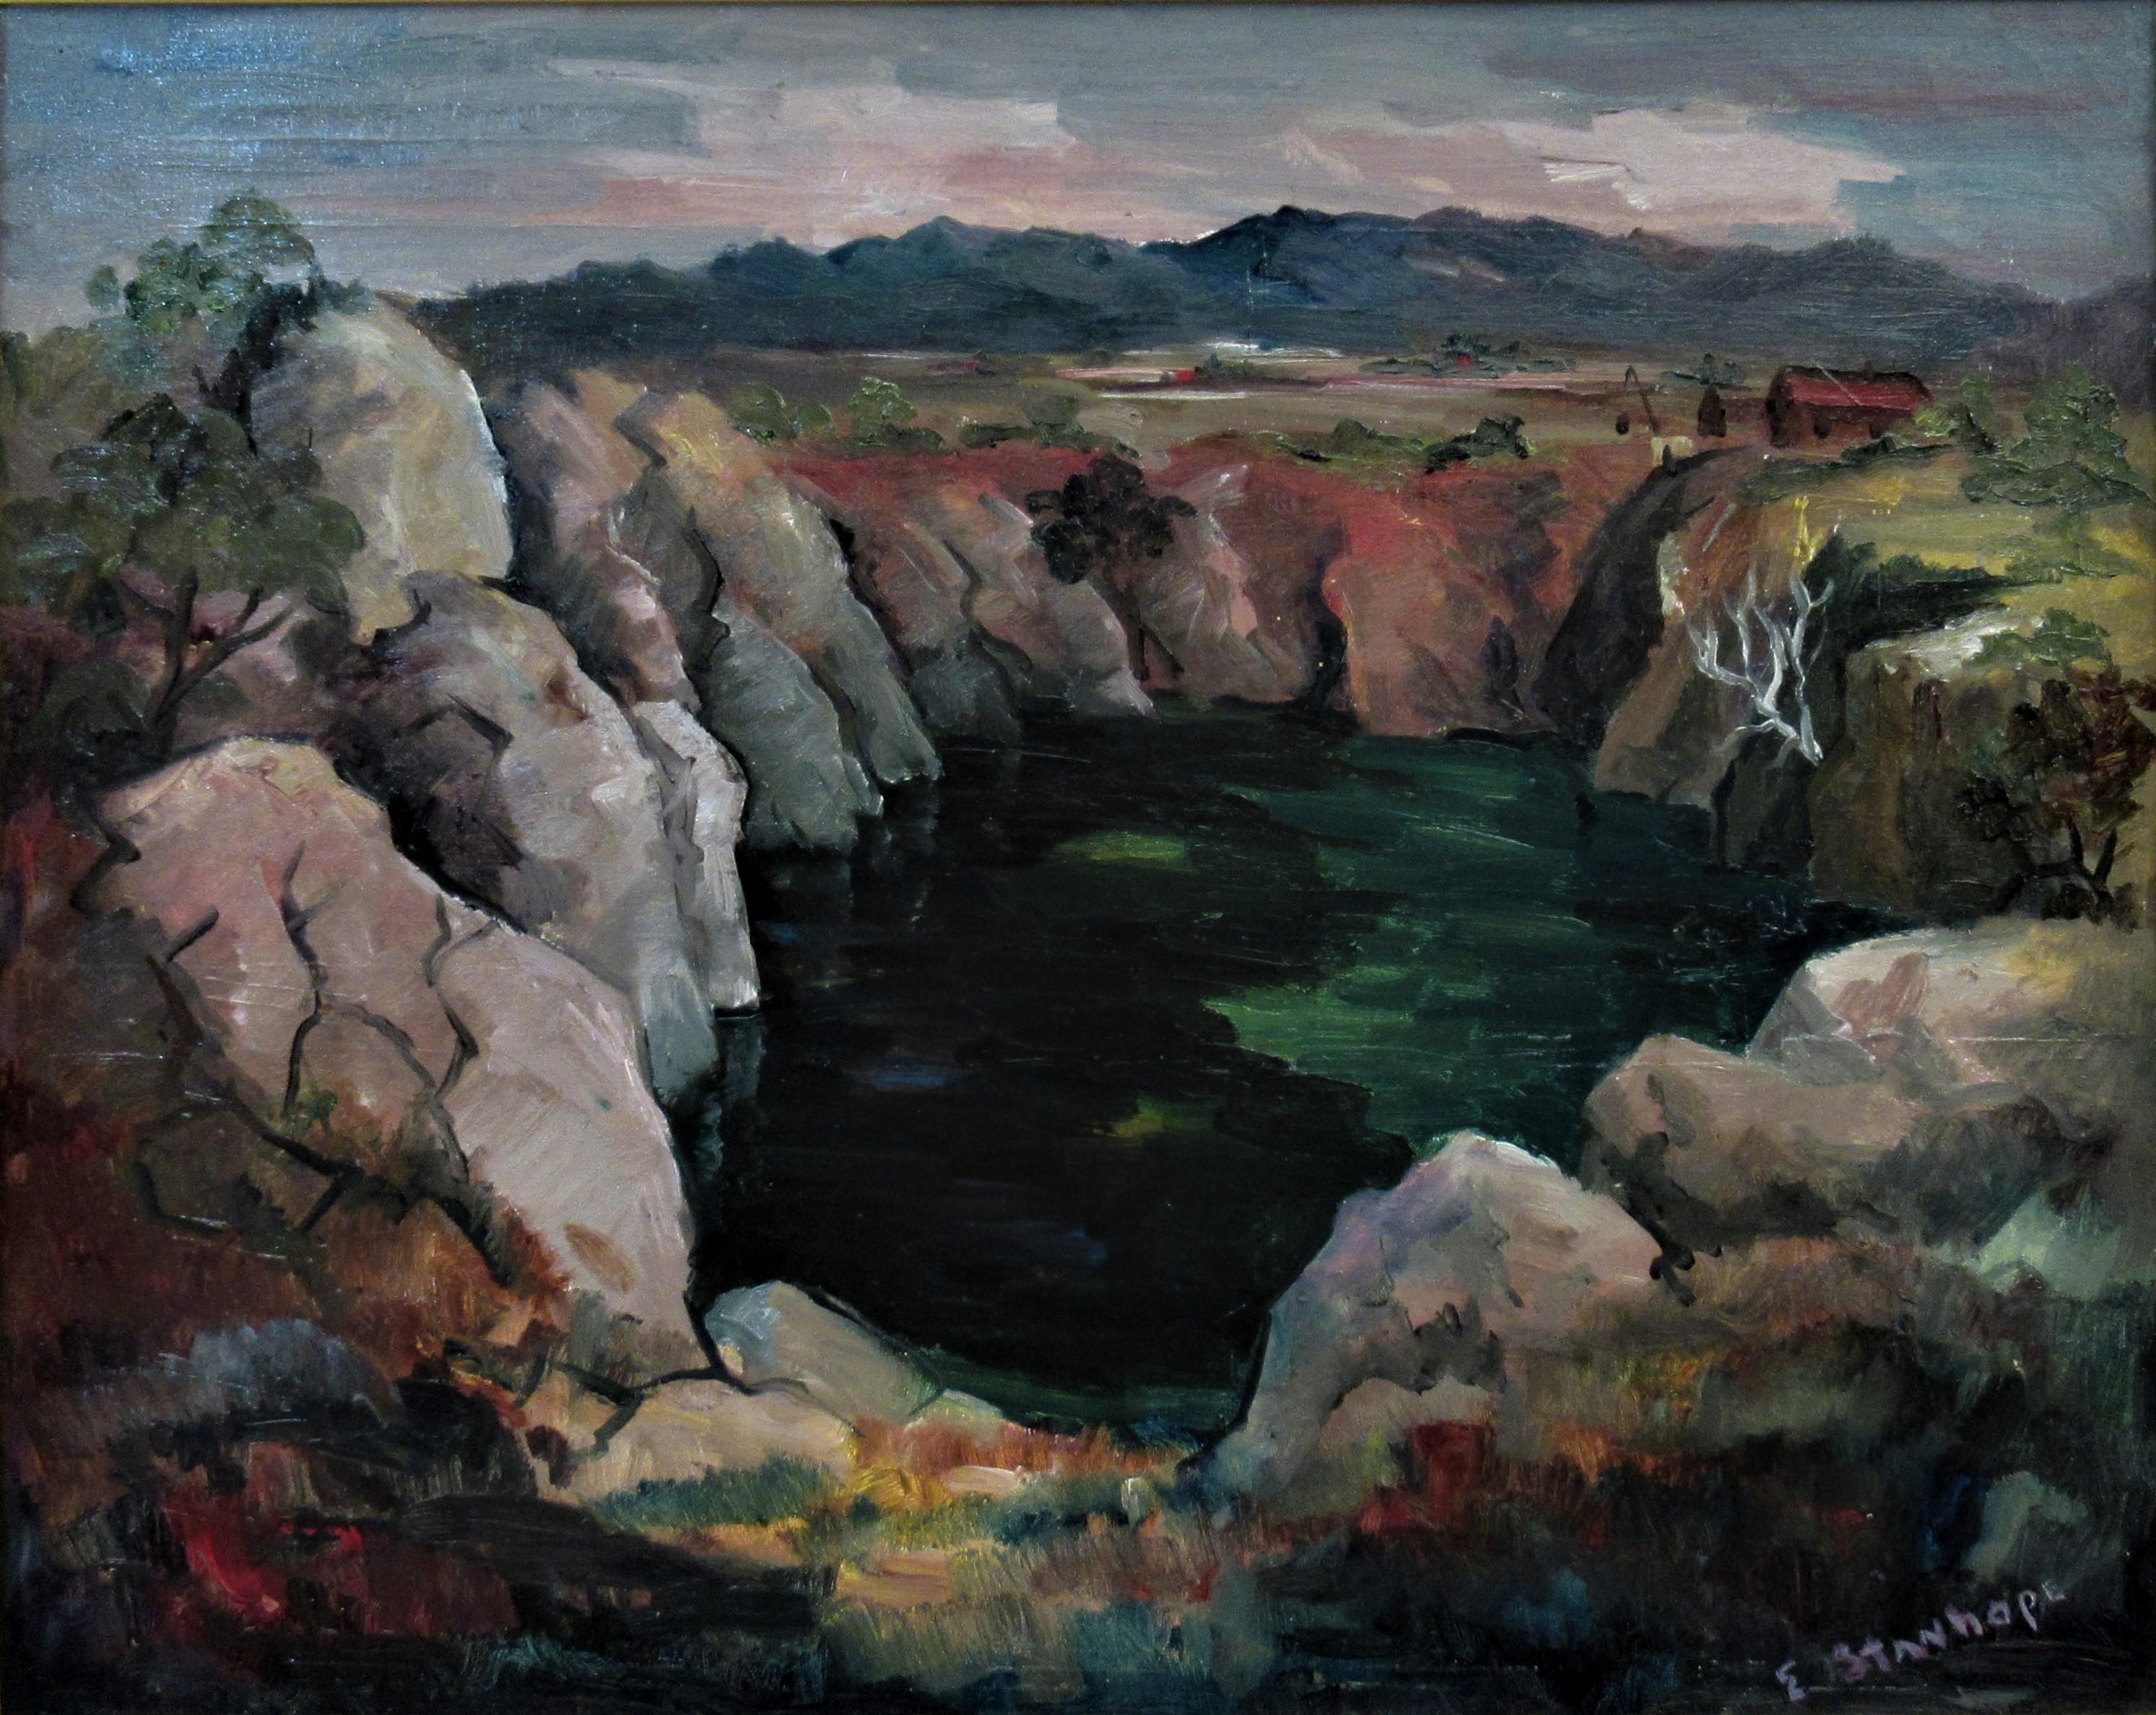 Landscape, California - Painting by Elmer Stanhope